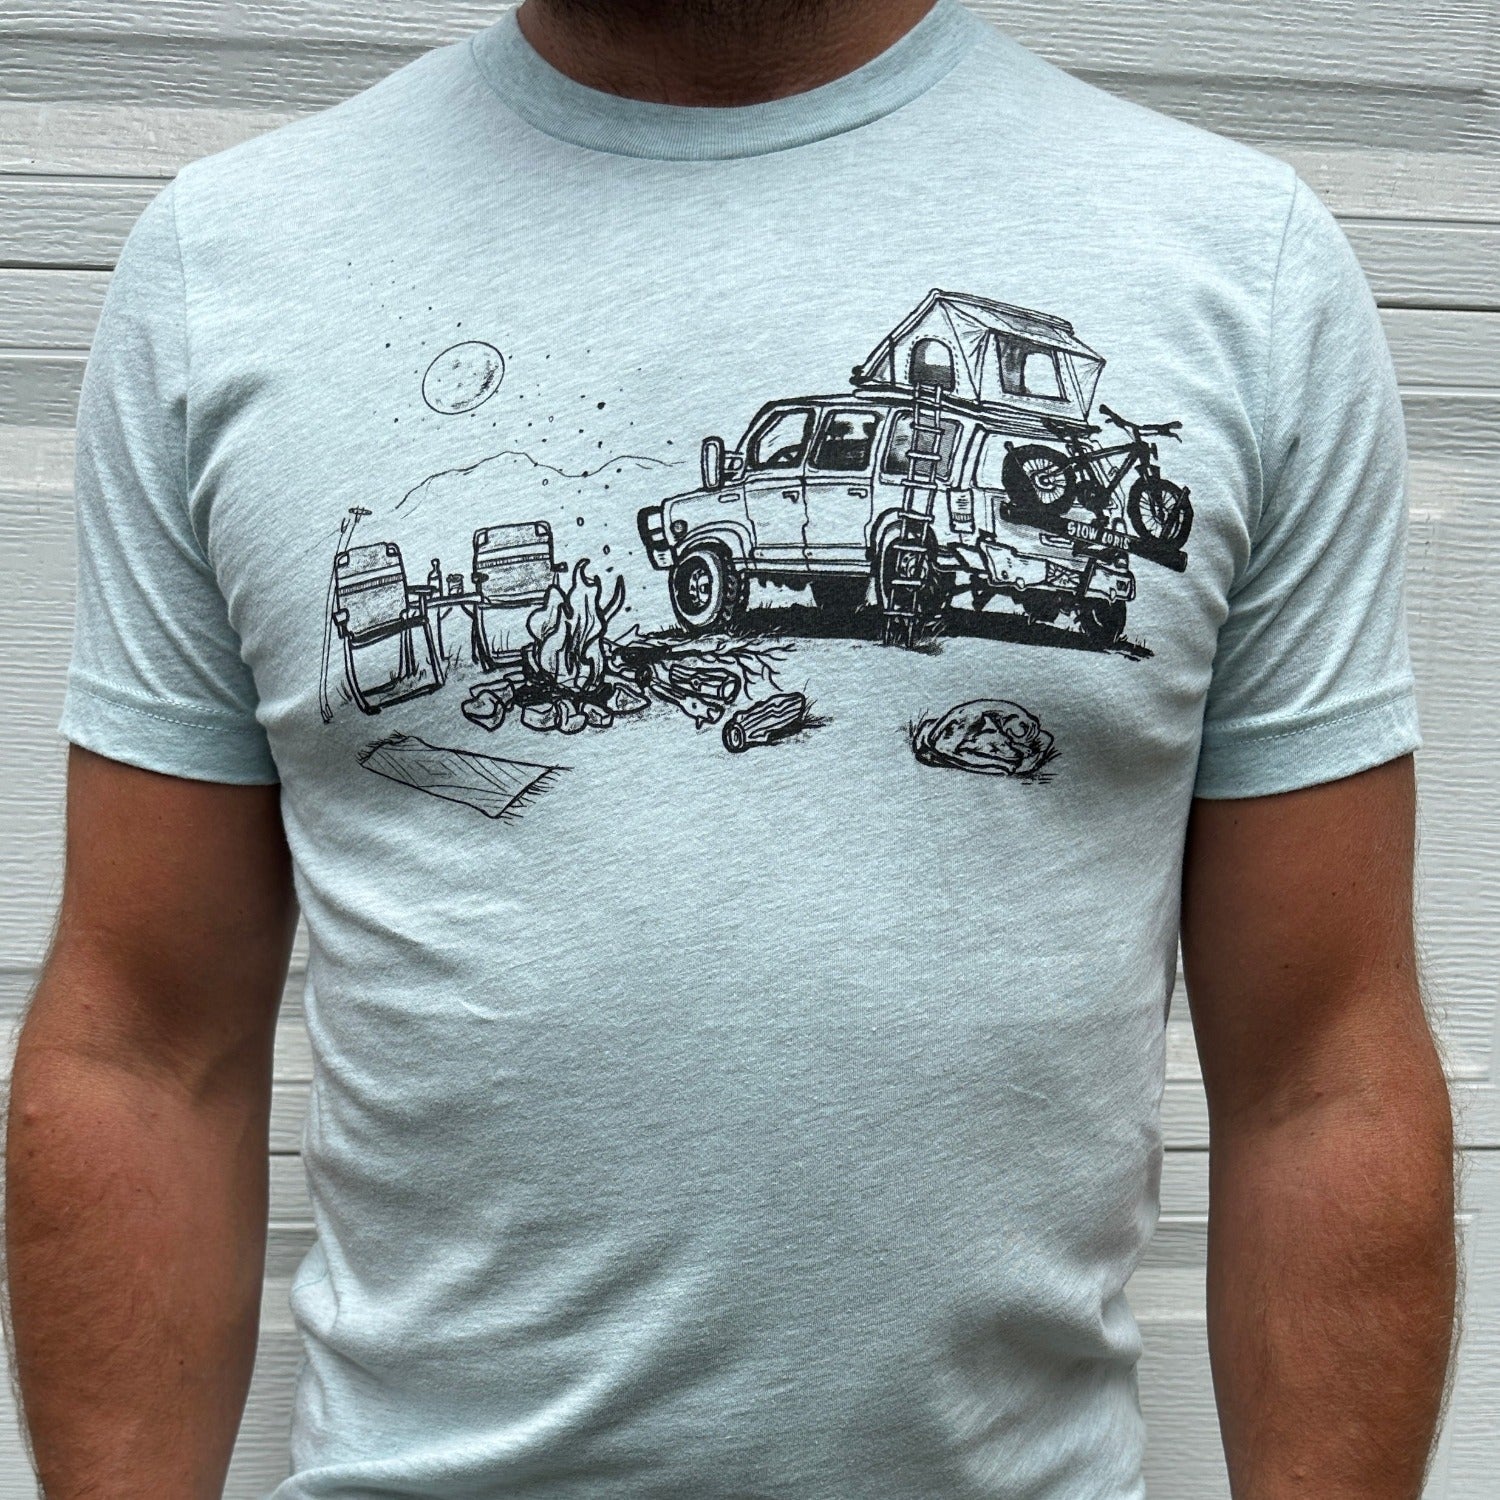 Man wearing light blue shirt with black ink print of campfire scene; car with rooftop tent with ladder, bike on the back. Campfire, two chairs, mountains and full moon. 